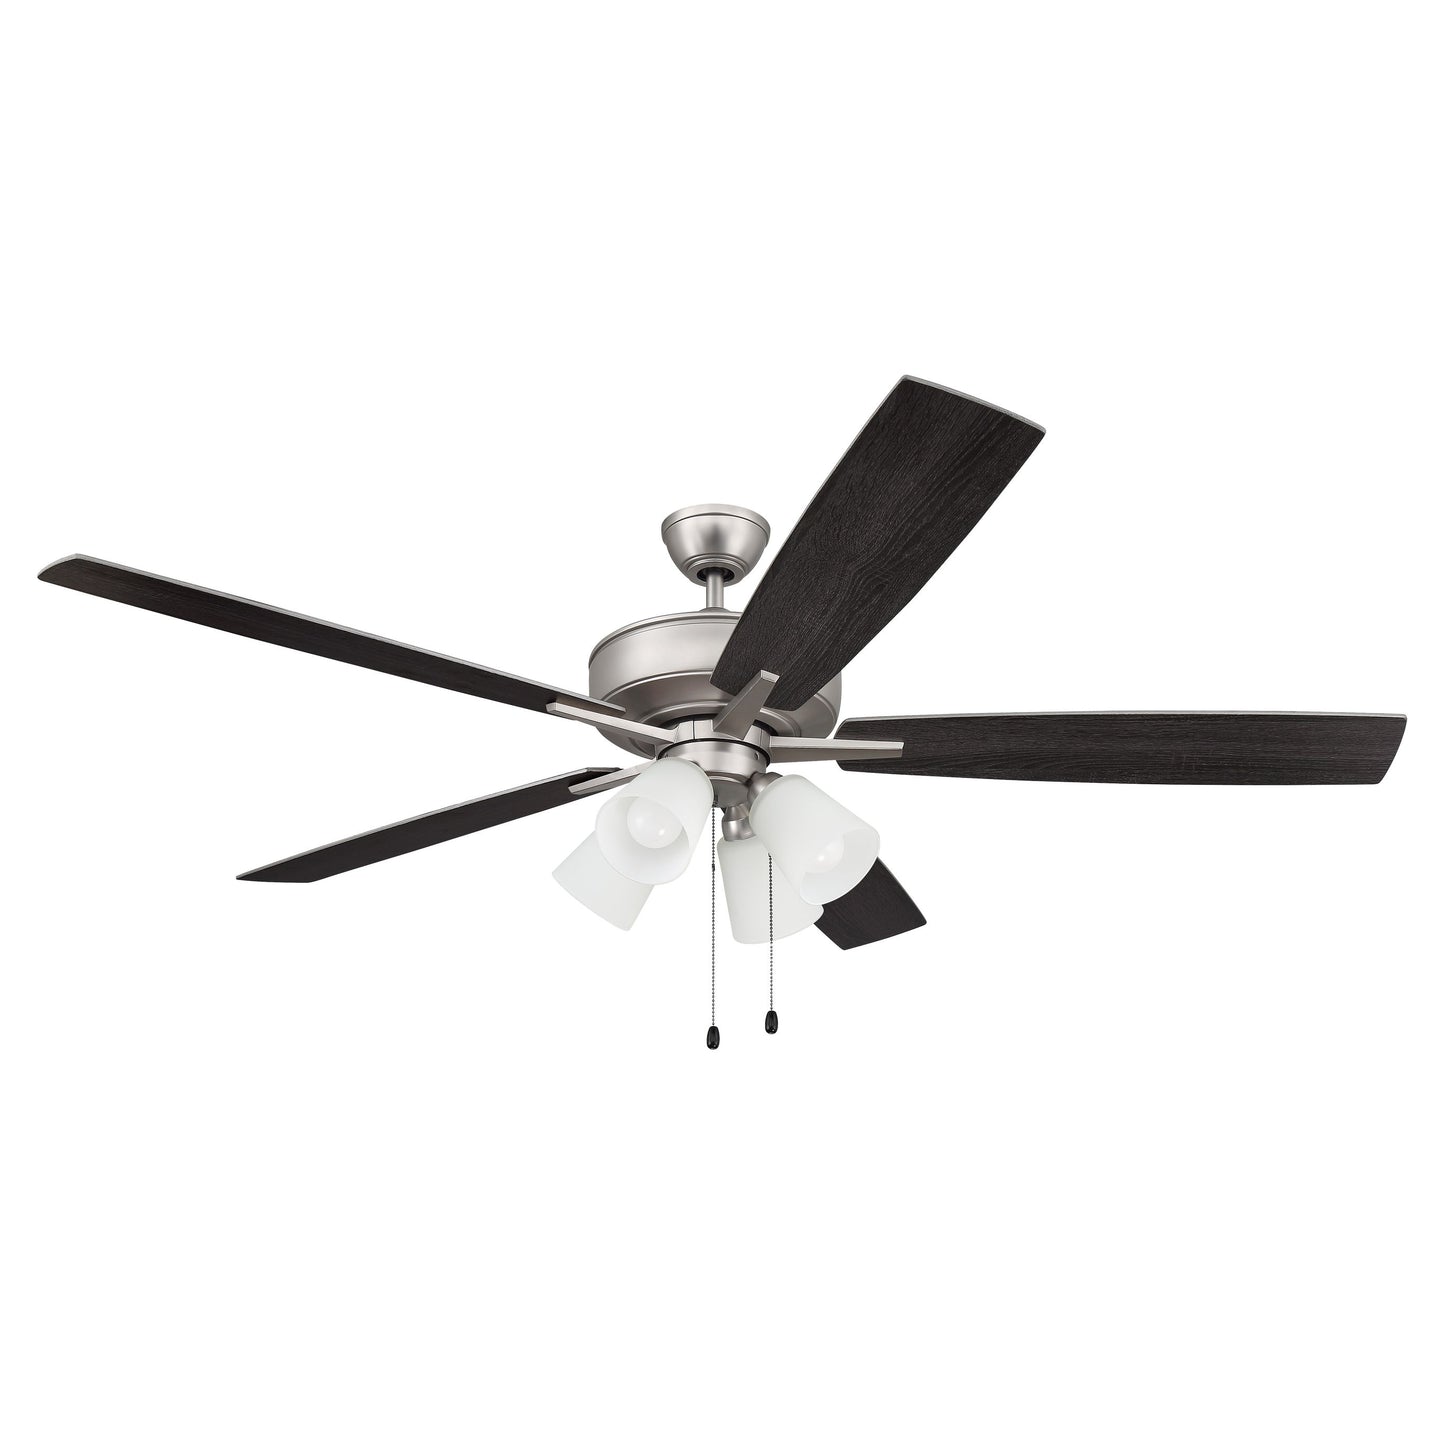 S114BN5-60BNGW - Super Pro 114 60" 5 Blade Ceiling Fan with Light Kit - Pull Chain - Brushed Satin N